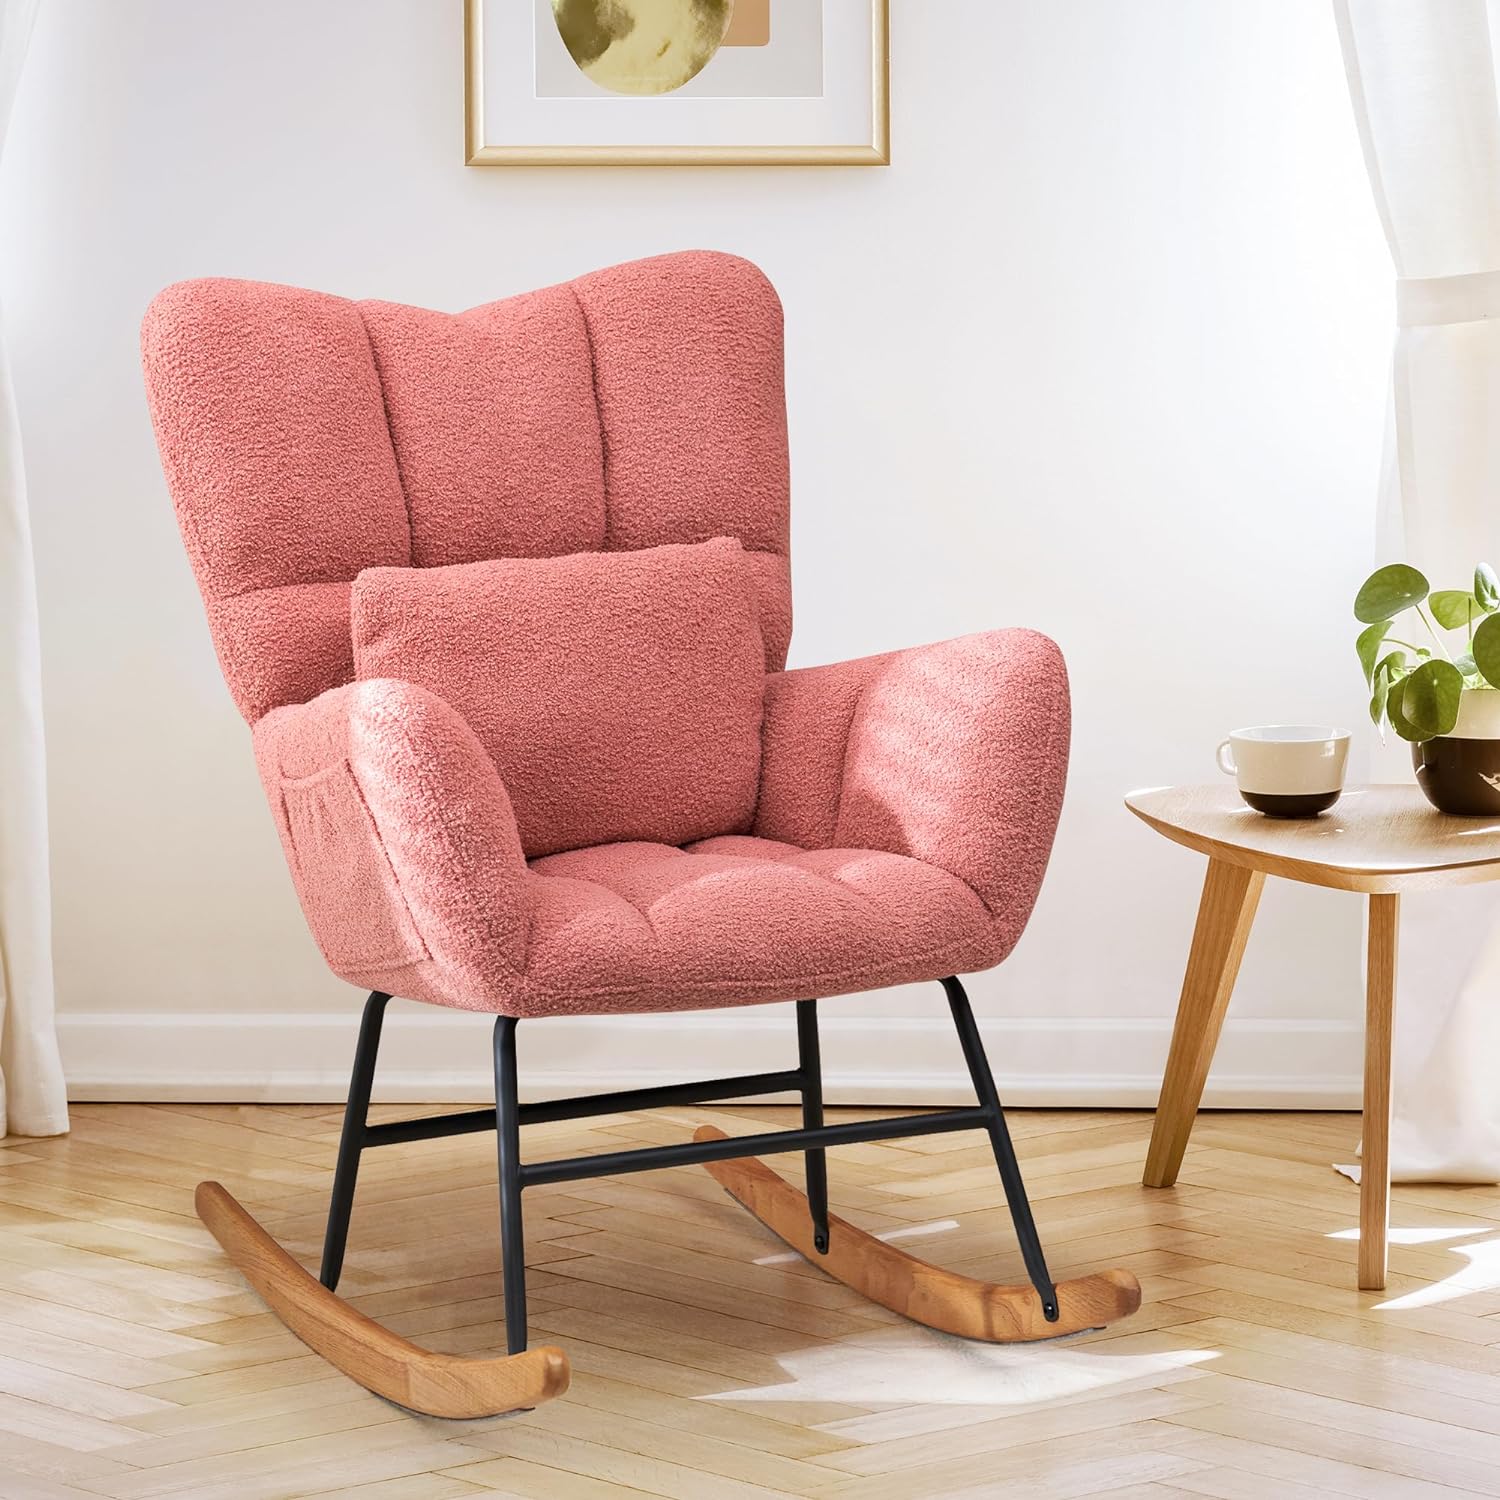 HABUTWAY Nursery Modern Accent Chair with Cushion, Teddy Fabric Rocker Glider Chair, Rocker Armchair with Solid Wood Legs & High Backrest, for Living Room, Bedroom, Balcony (Rose Pink)